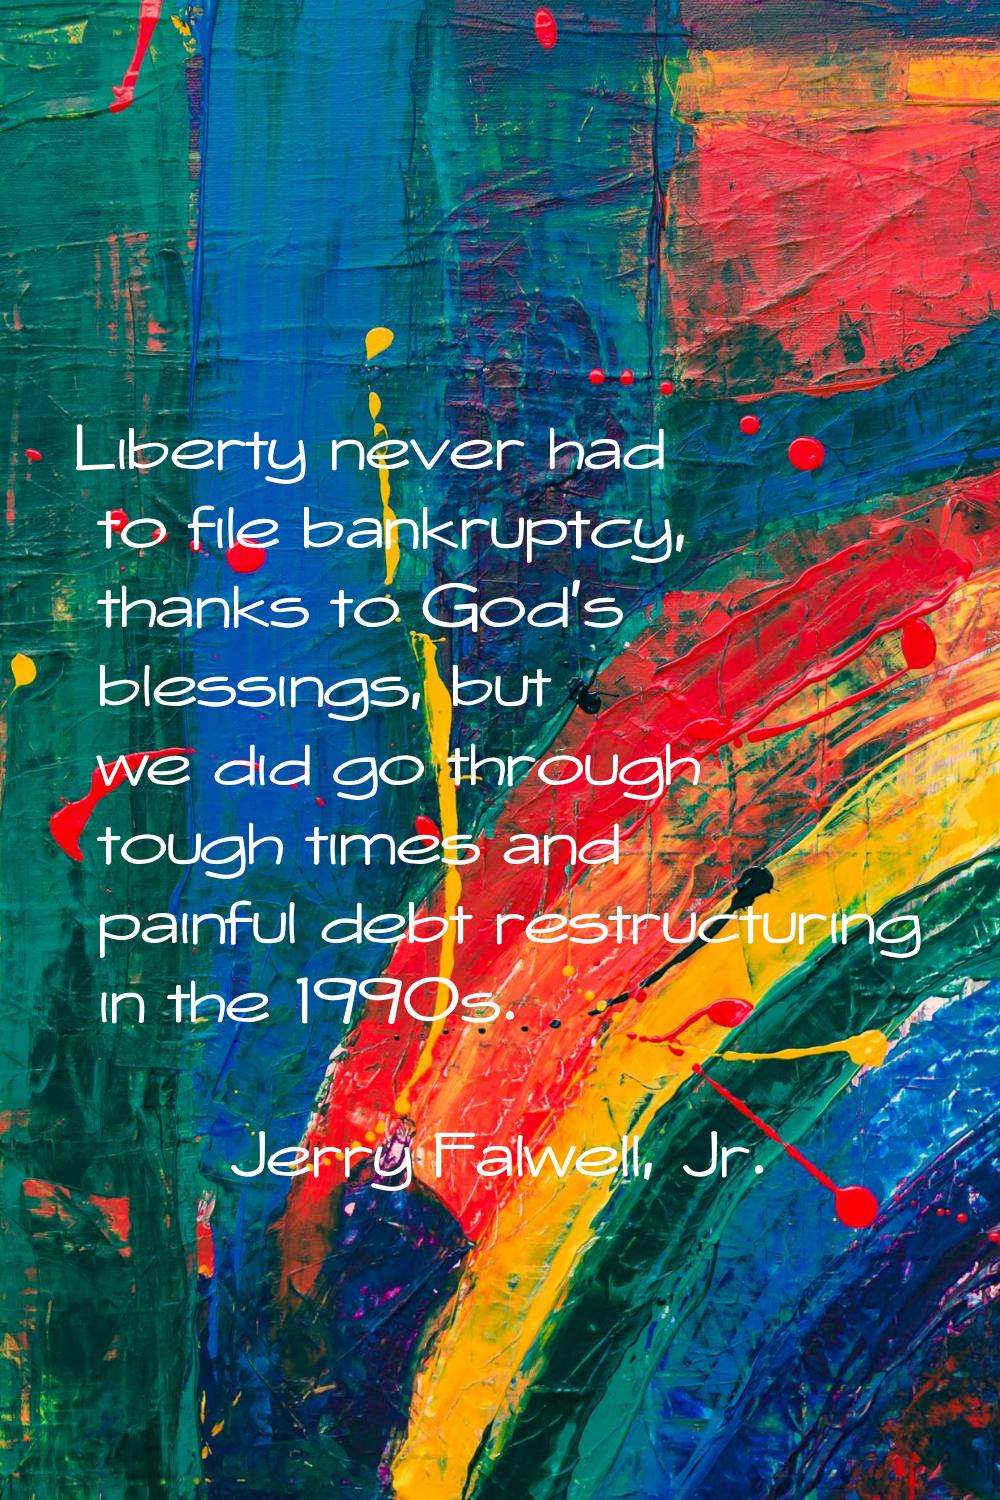 Liberty never had to file bankruptcy, thanks to God's blessings, but we did go through tough times 